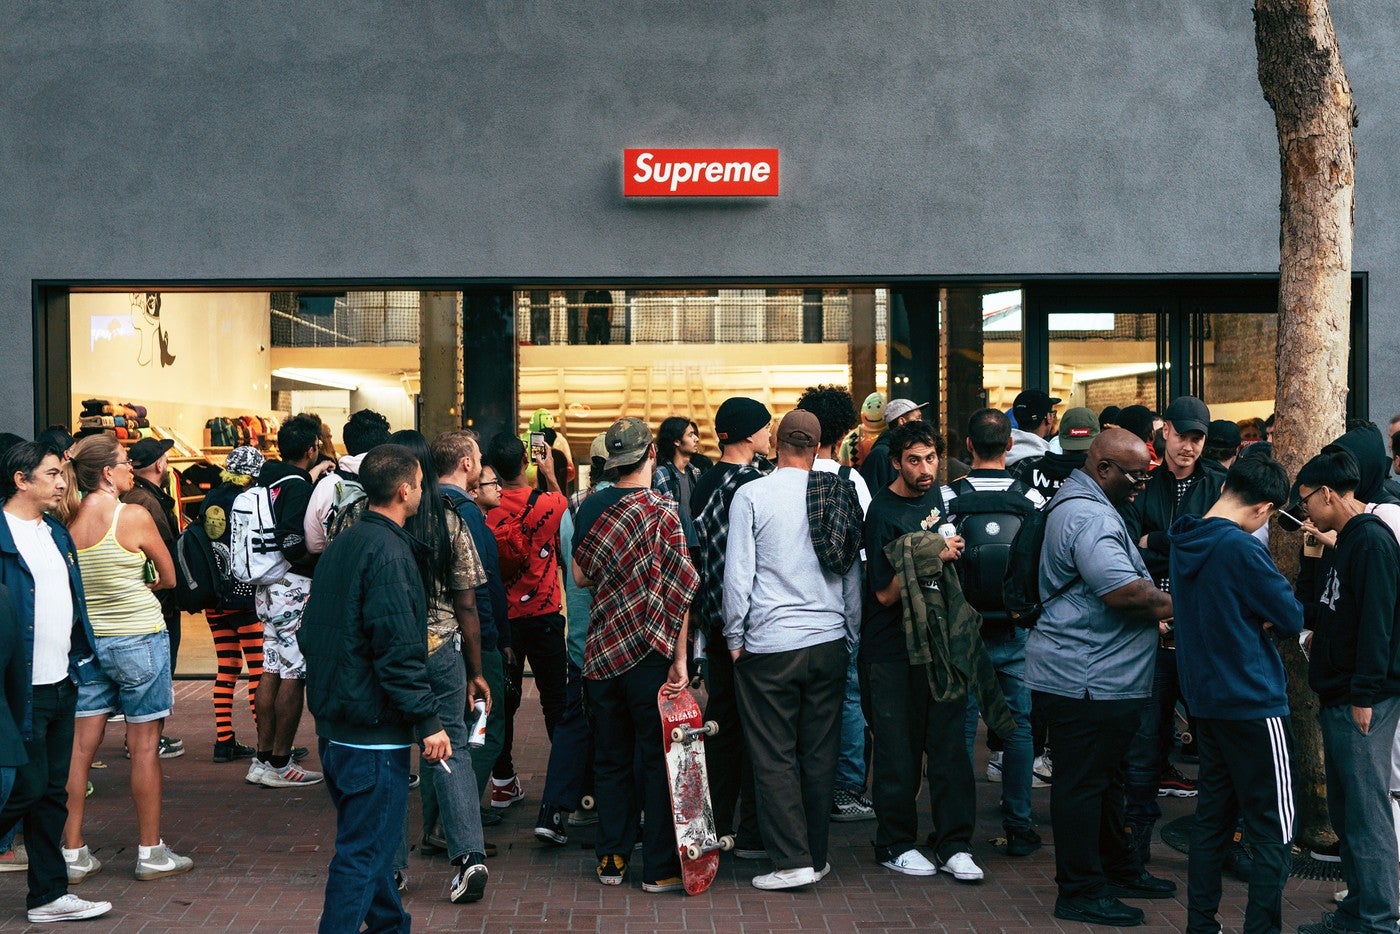 Why Supreme Brand Is So Expensive?, by CPT Markets